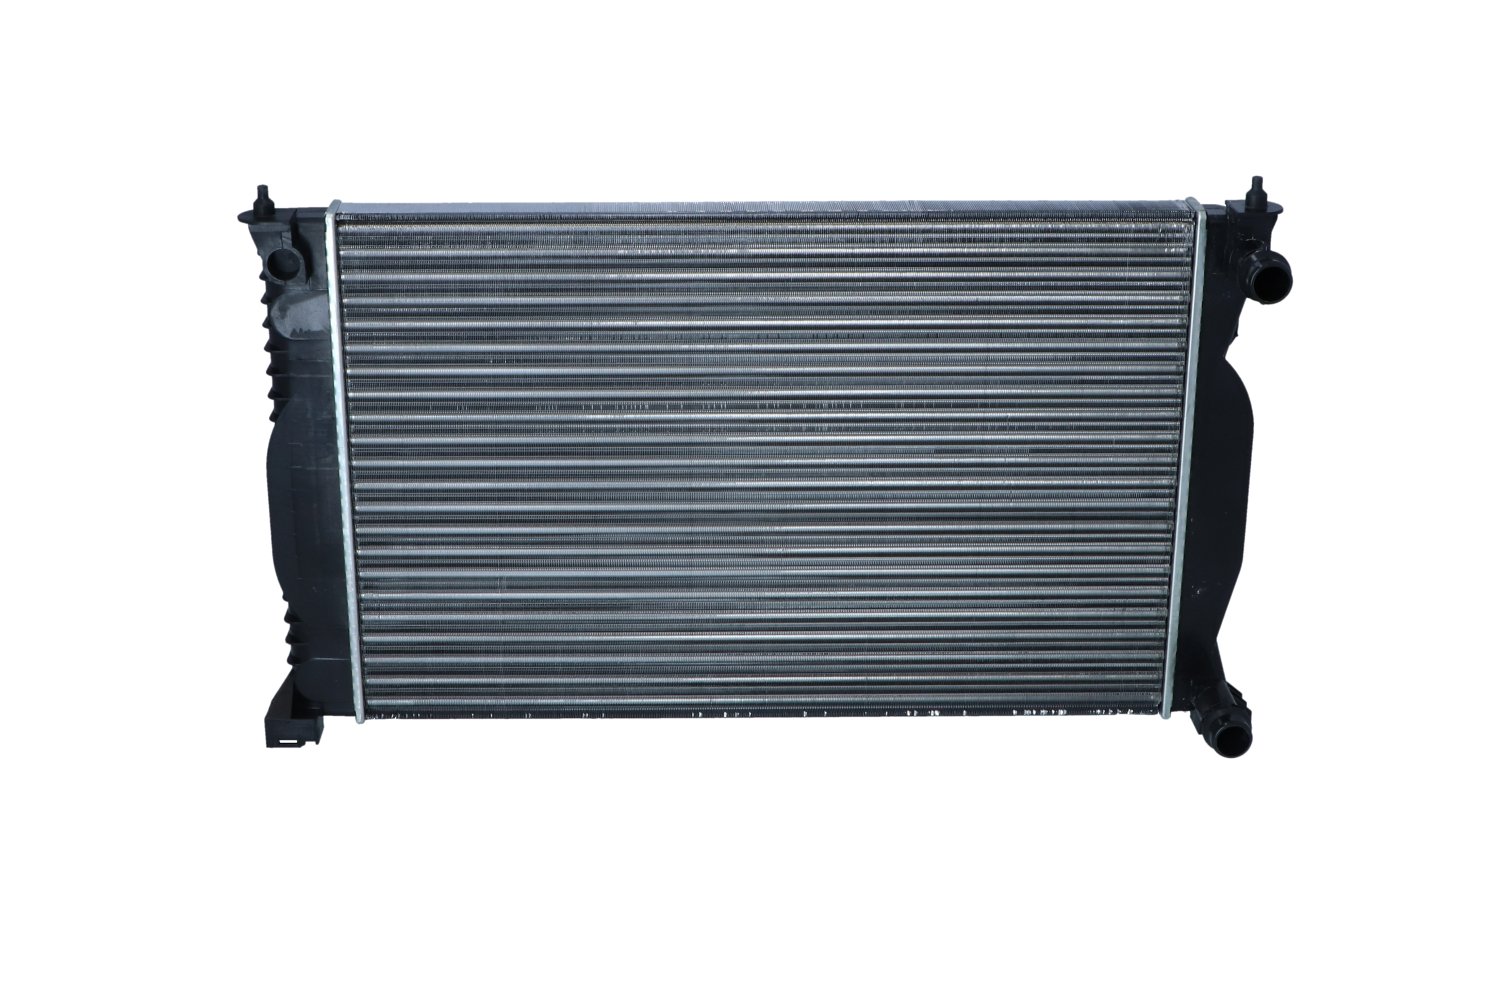 NRF 50539A Engine radiator Aluminium, 632 x 415 x 34 mm, Economy Class, Mechanically jointed cooling fins